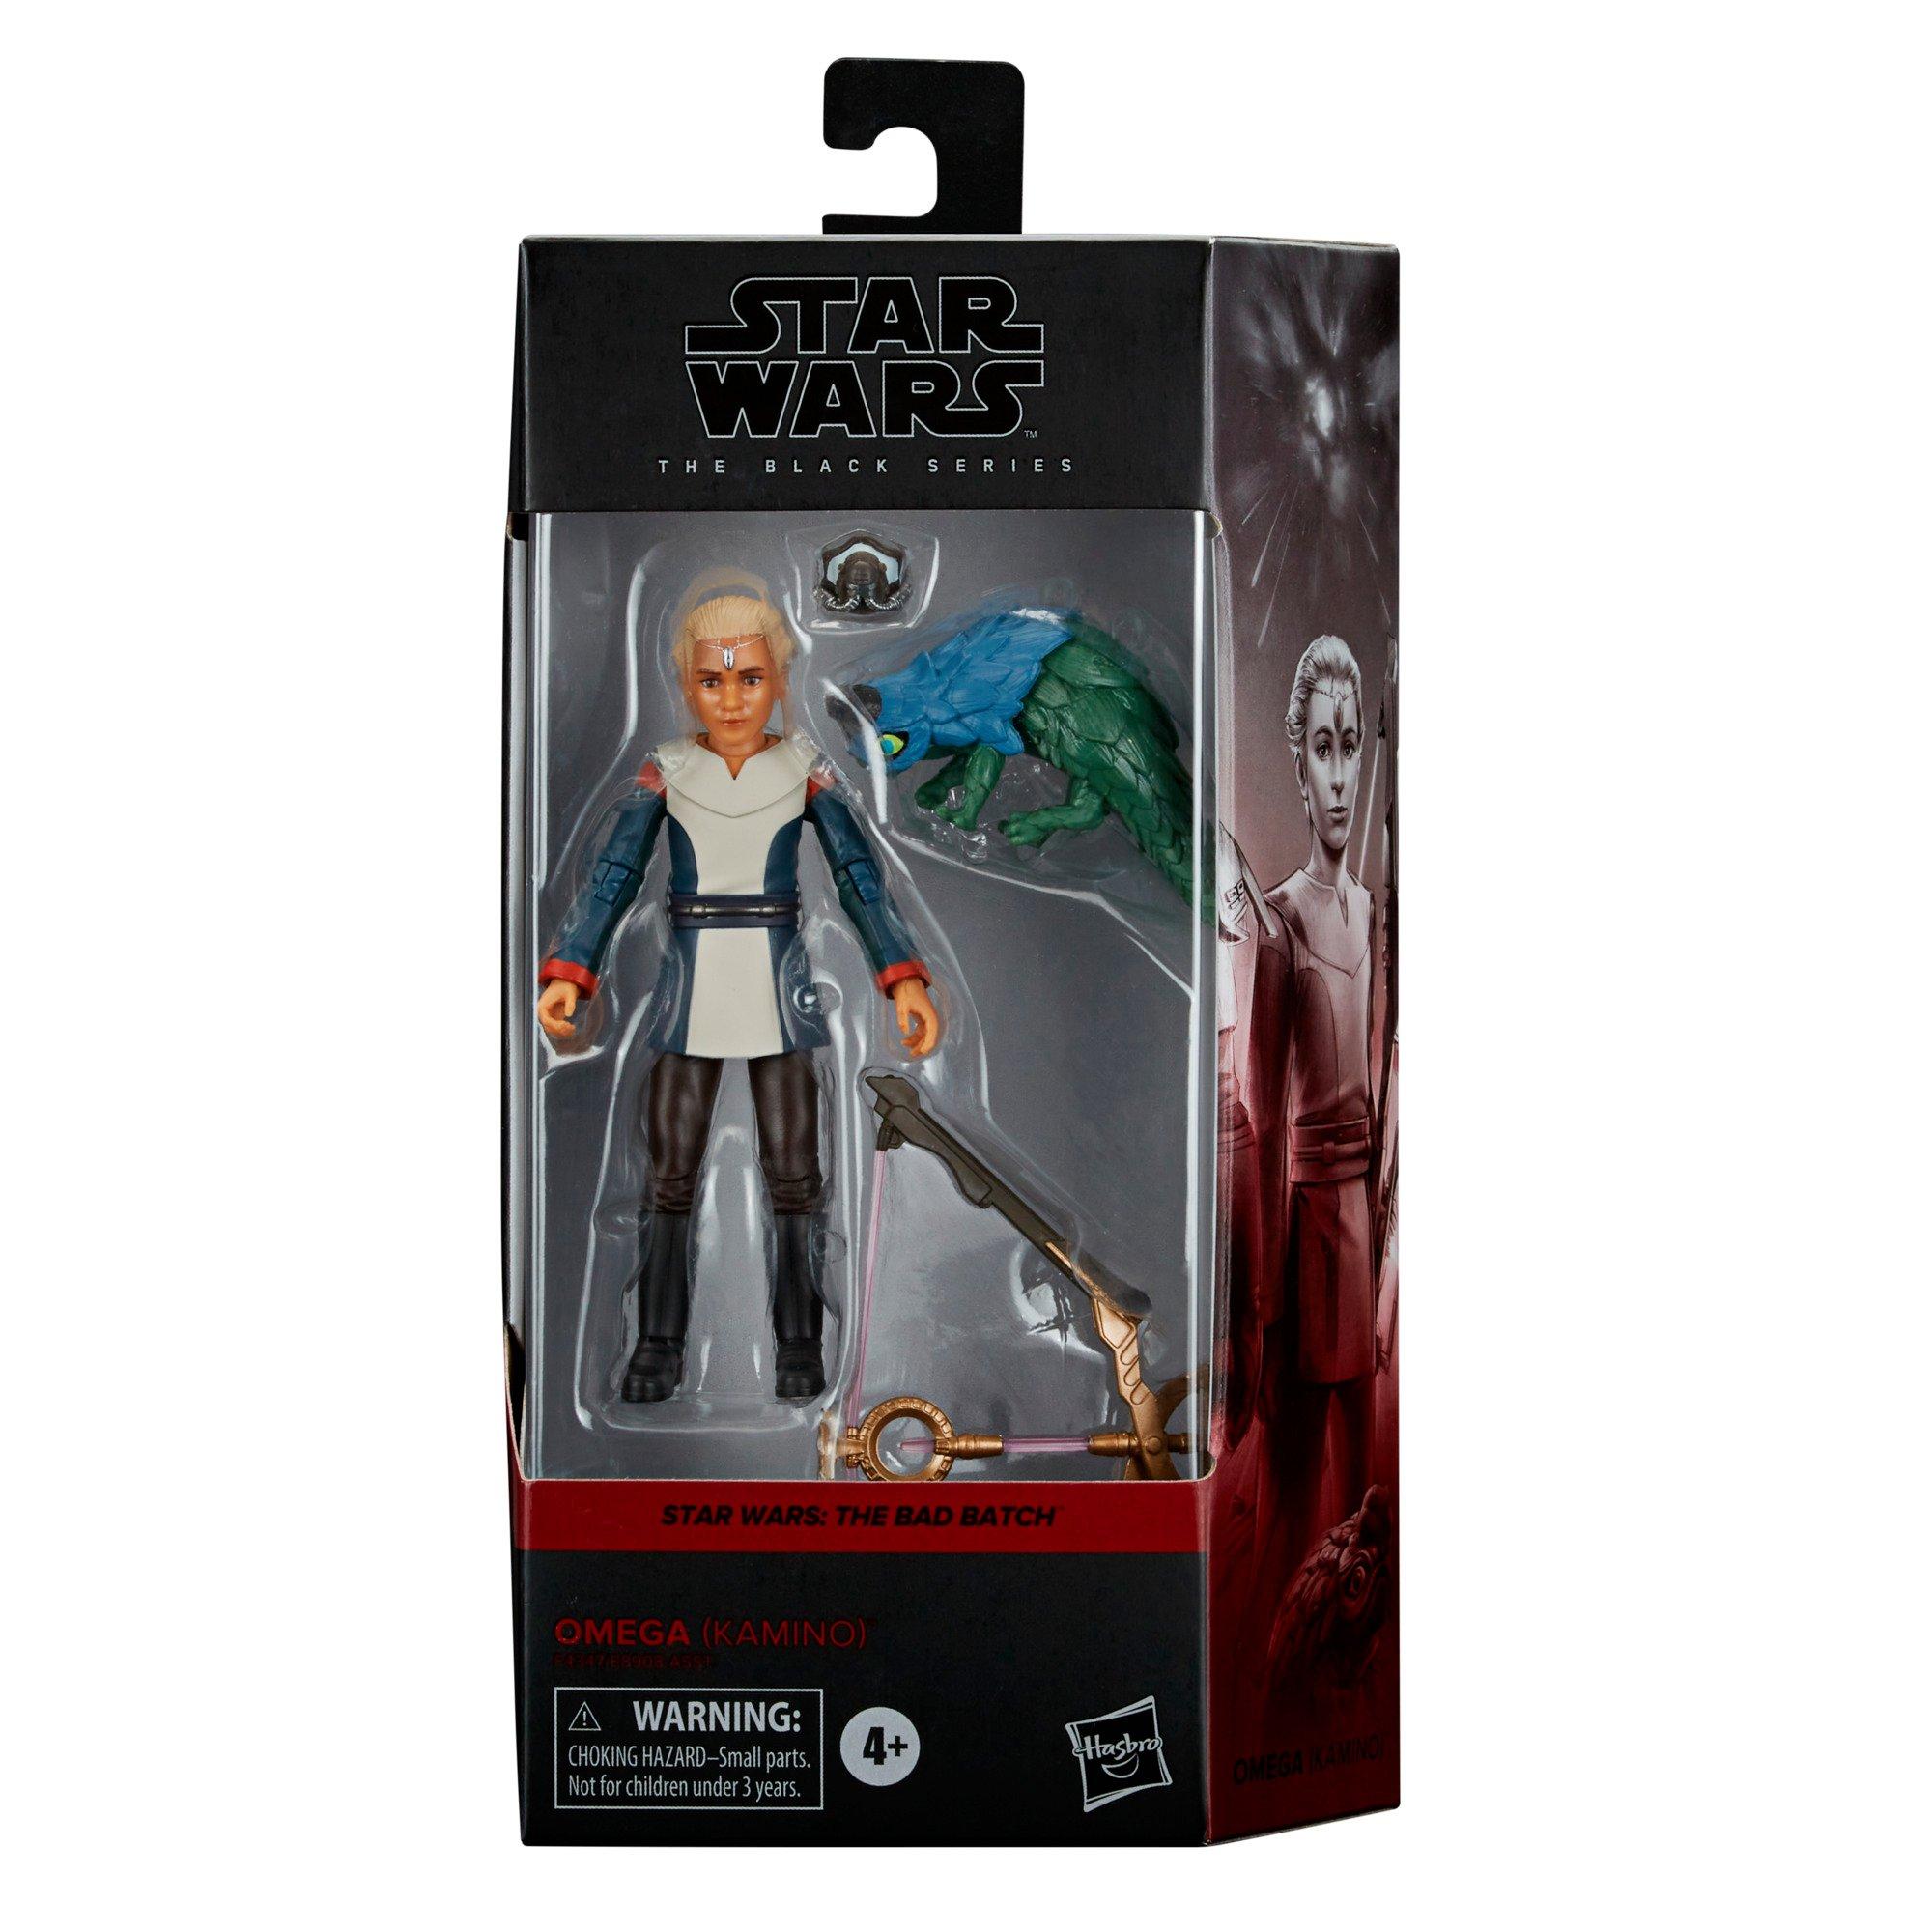 Hasbro Star Wars: The Bad Batch Omega (Kamino) The Black Series 6-in Action Figure